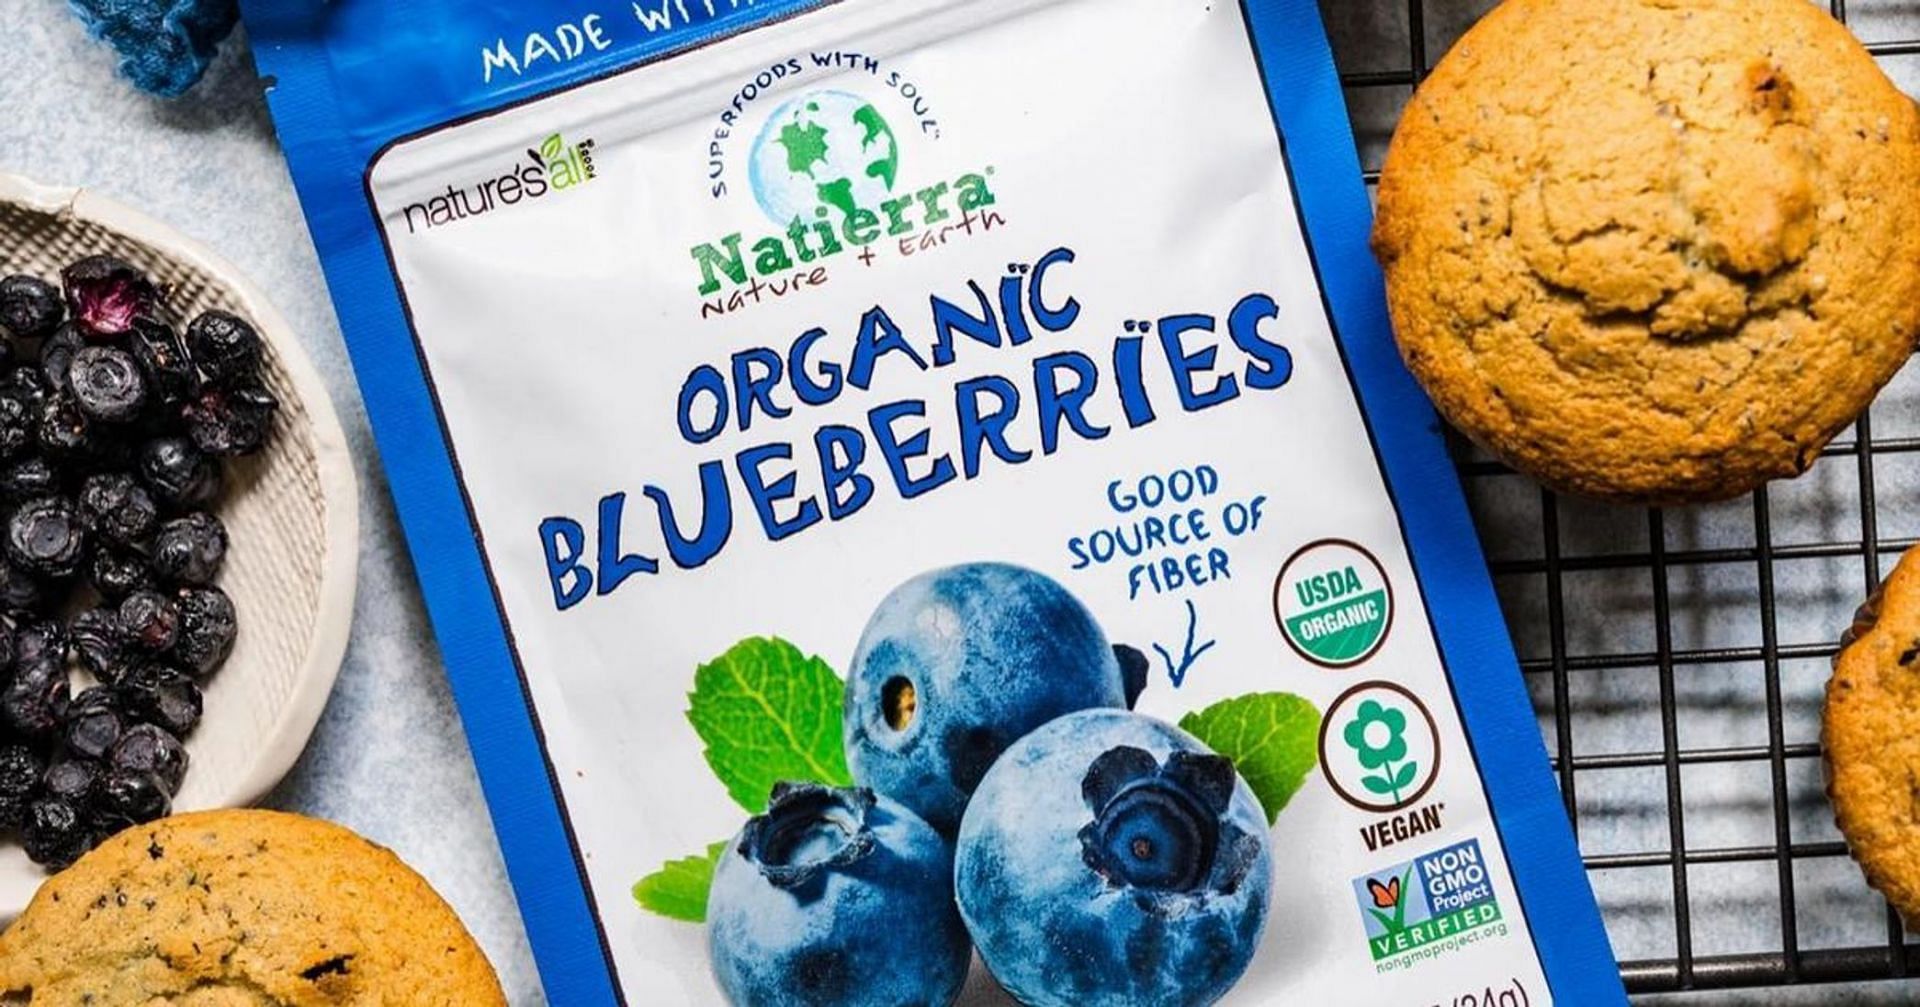 BrandStorm voluntarily takes back contaminated blueberries (Image via Getty Images)